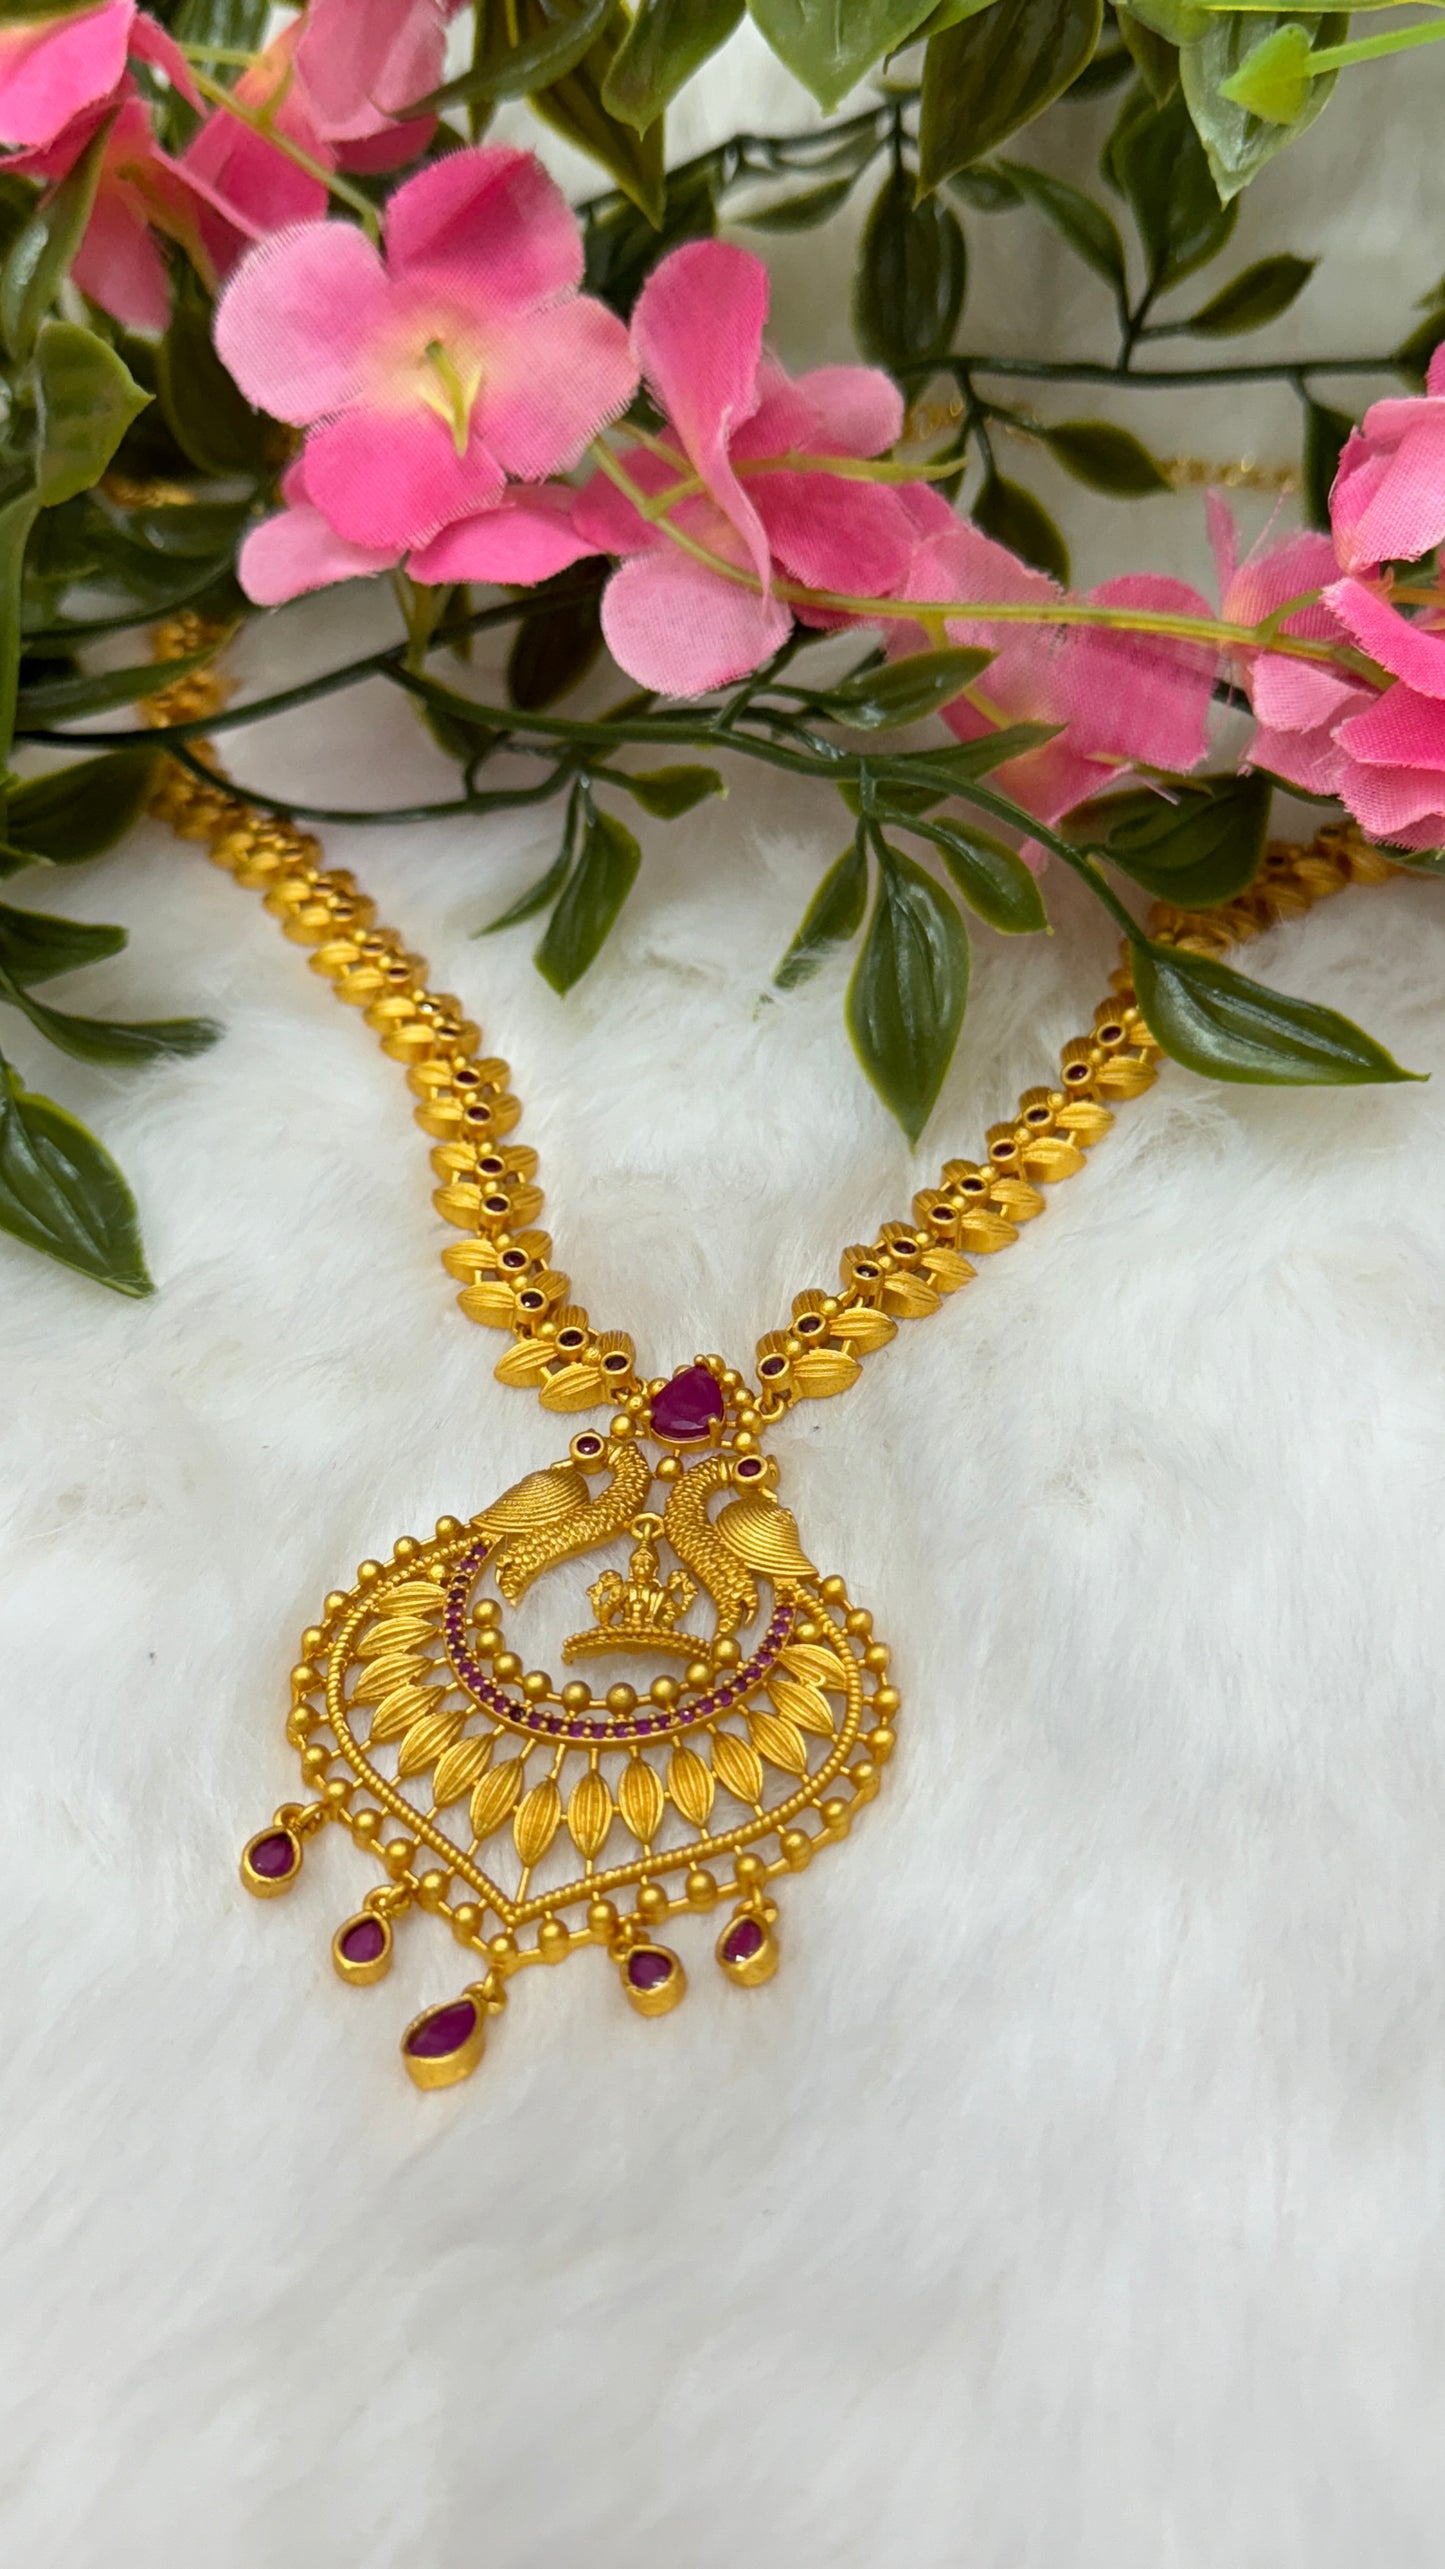 Beautiful and Exquisite Haram jewelry